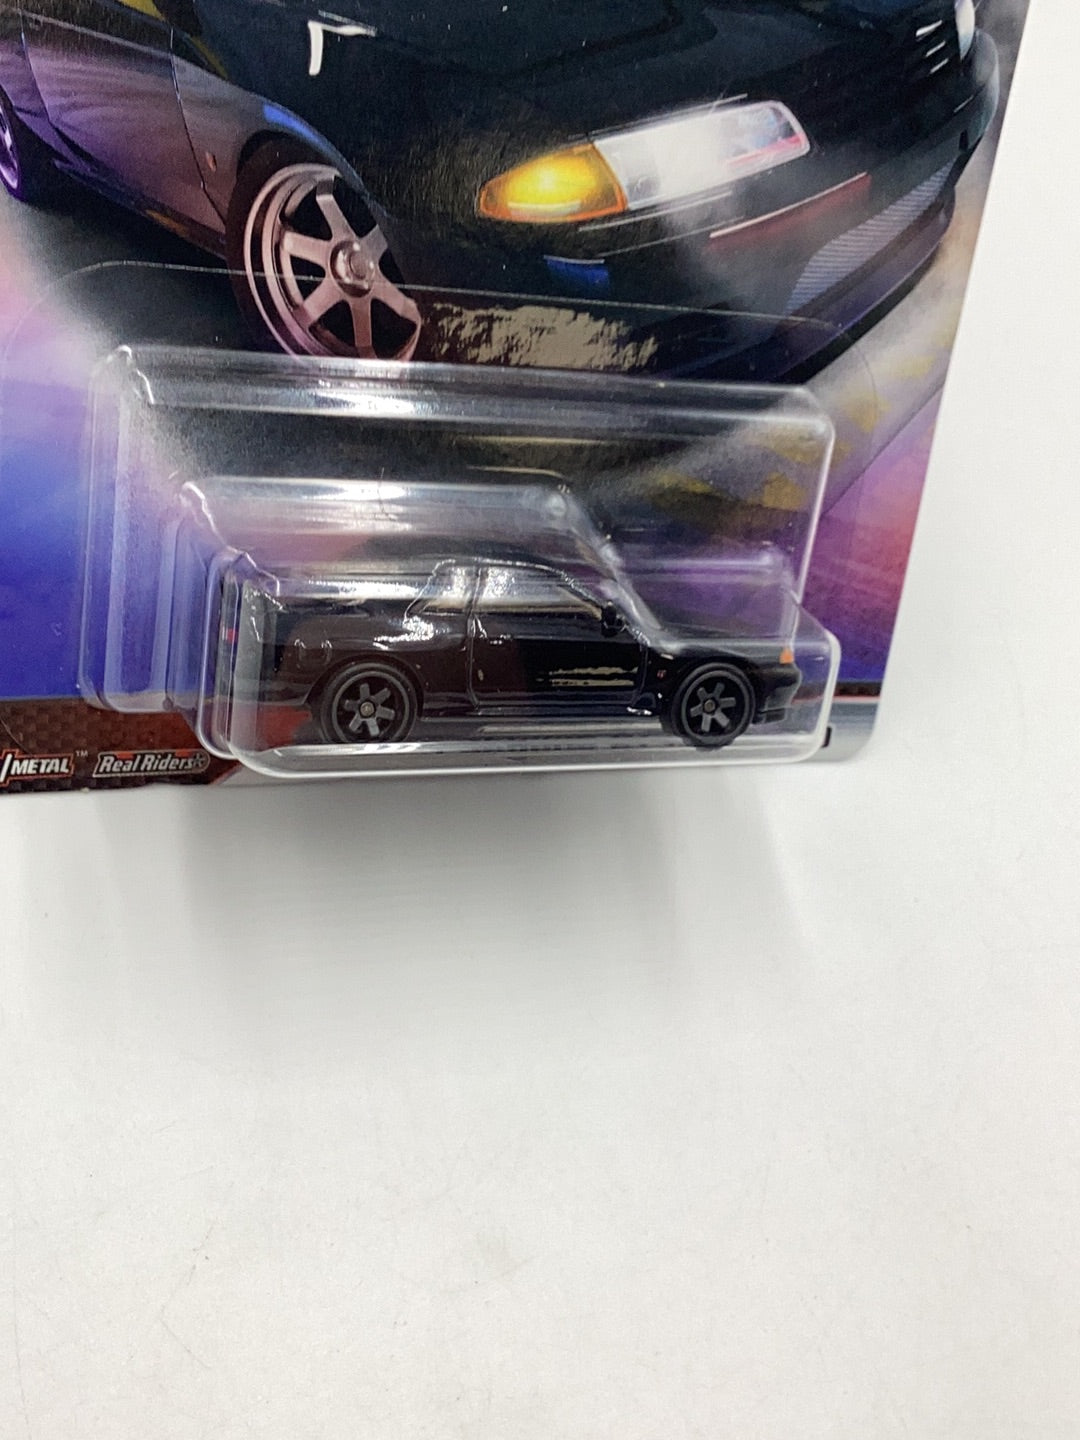 Hot Wheels fast and furious fast imports #5 nissan skyline gt-R bnr32 247A